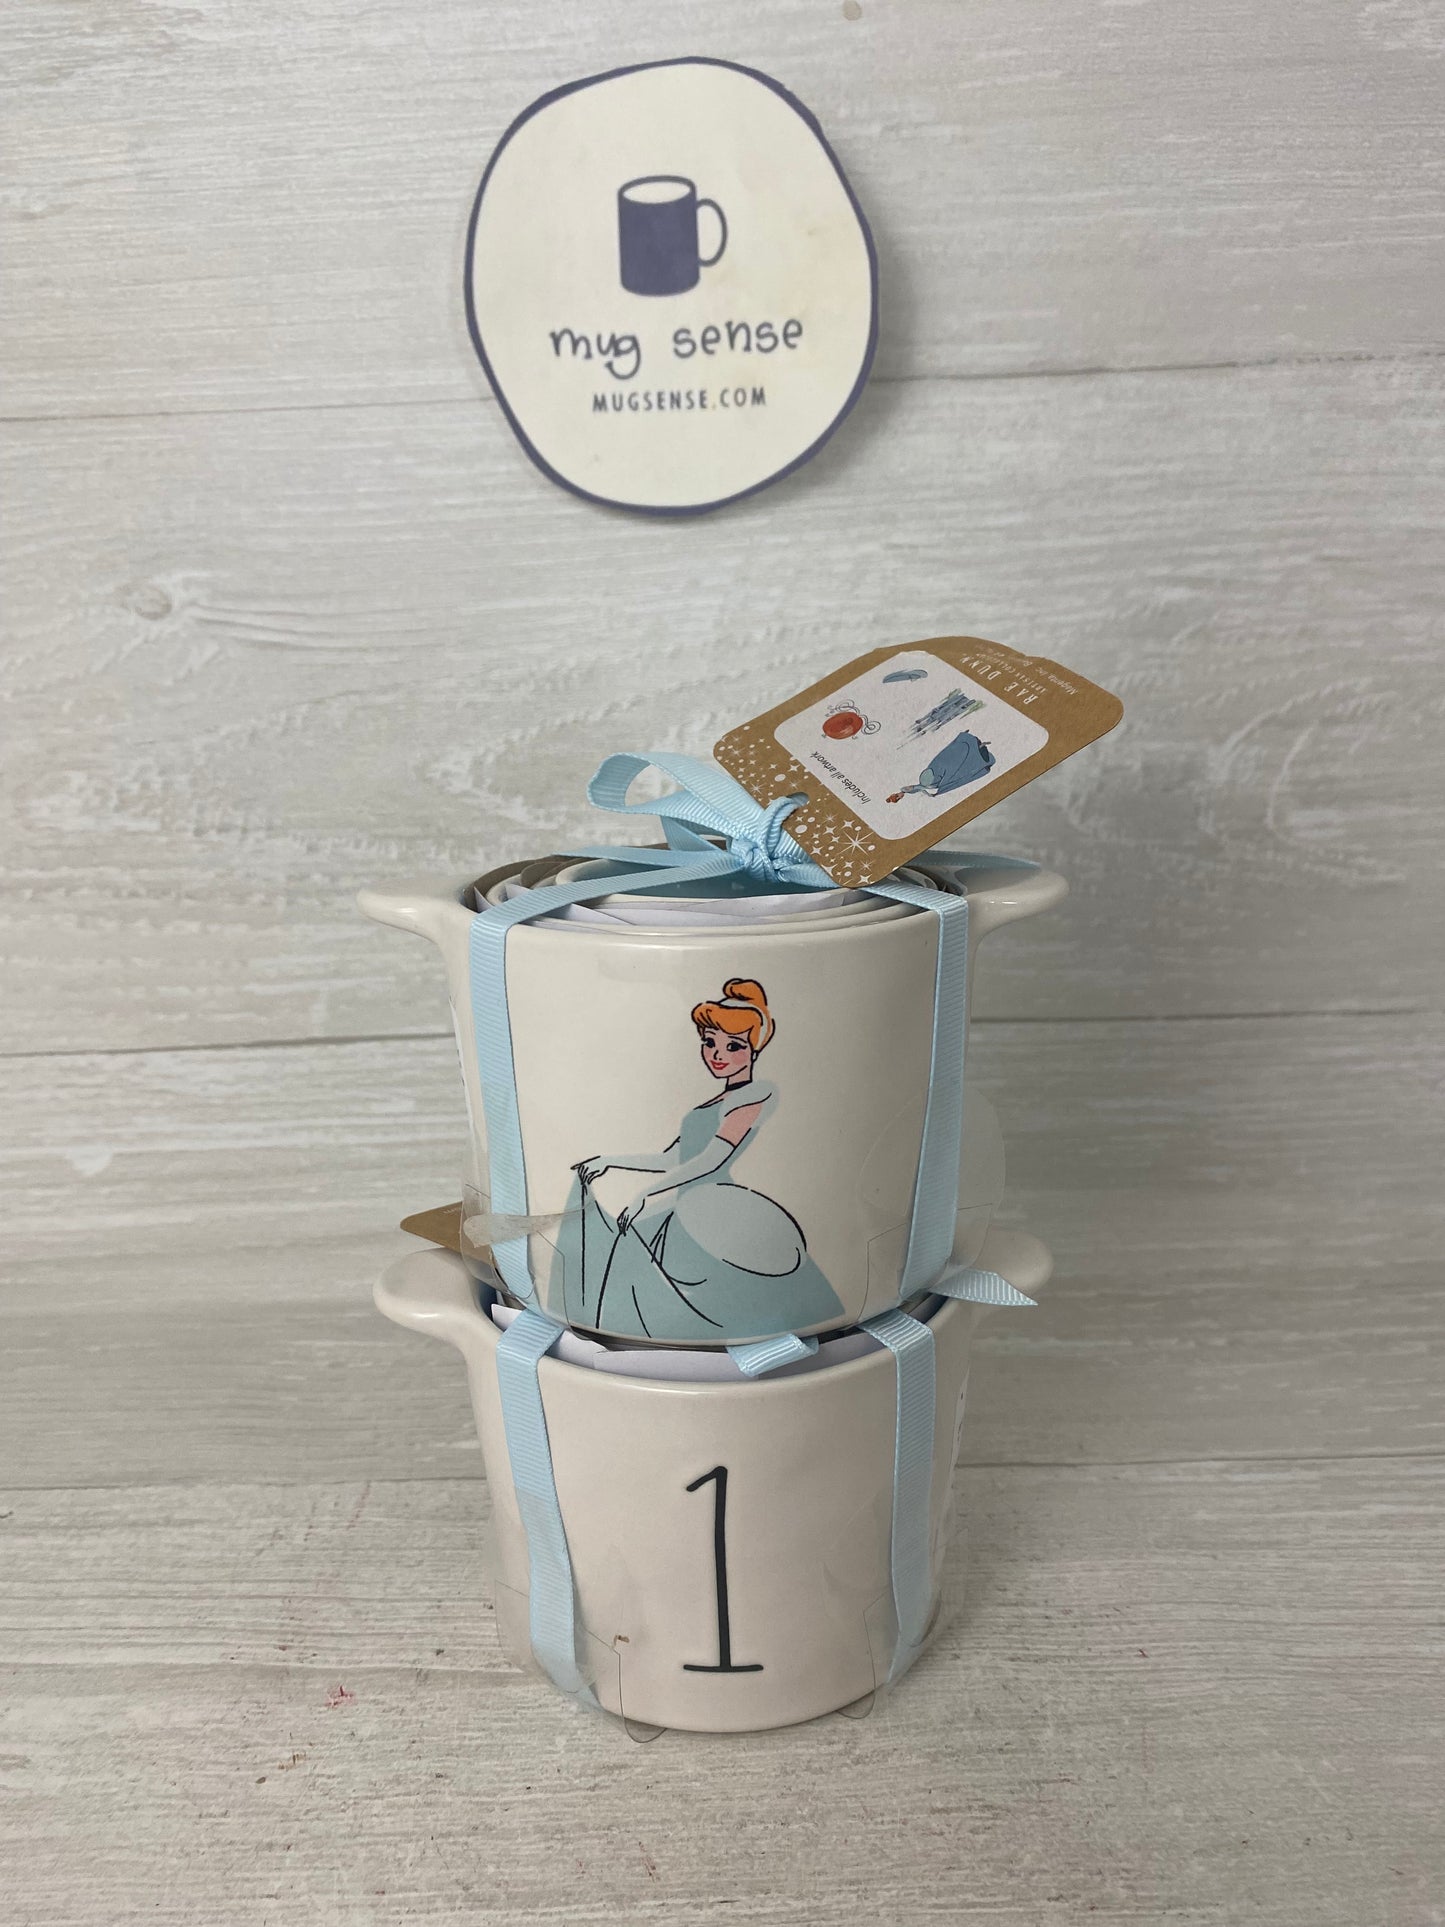 New Rae Dunn Disney Cinderella Measuring Cup With Handle Set of 4 